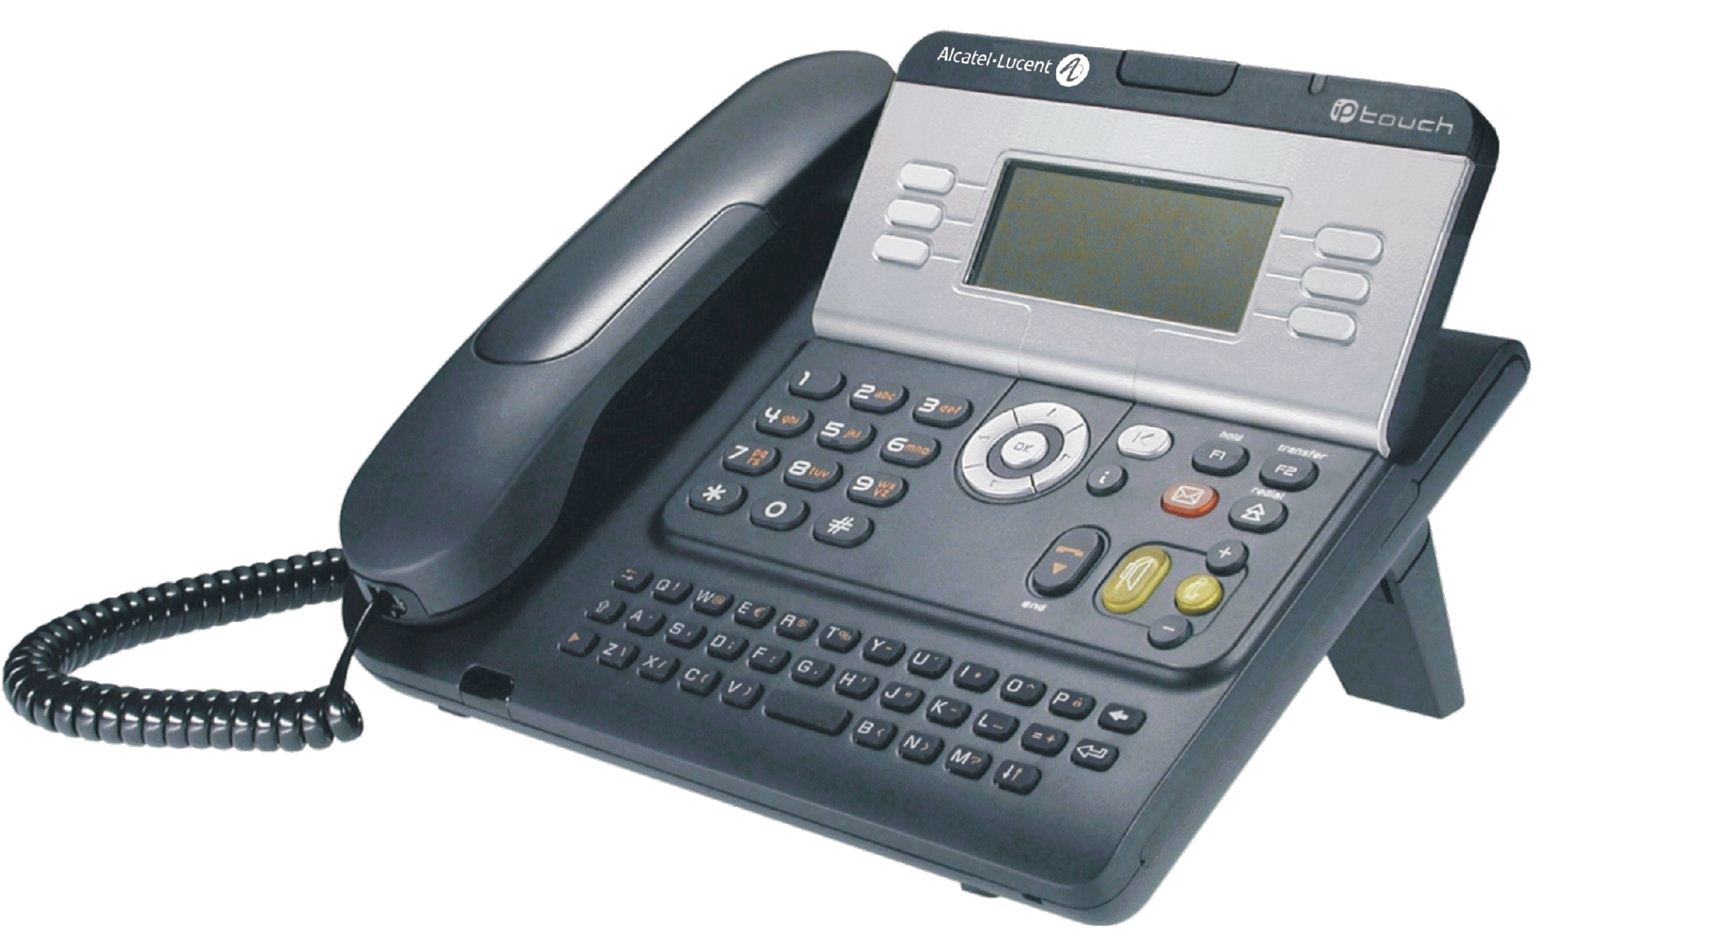 ALCATEL-LUCENT IP TOUCH 4028 IP PHONE